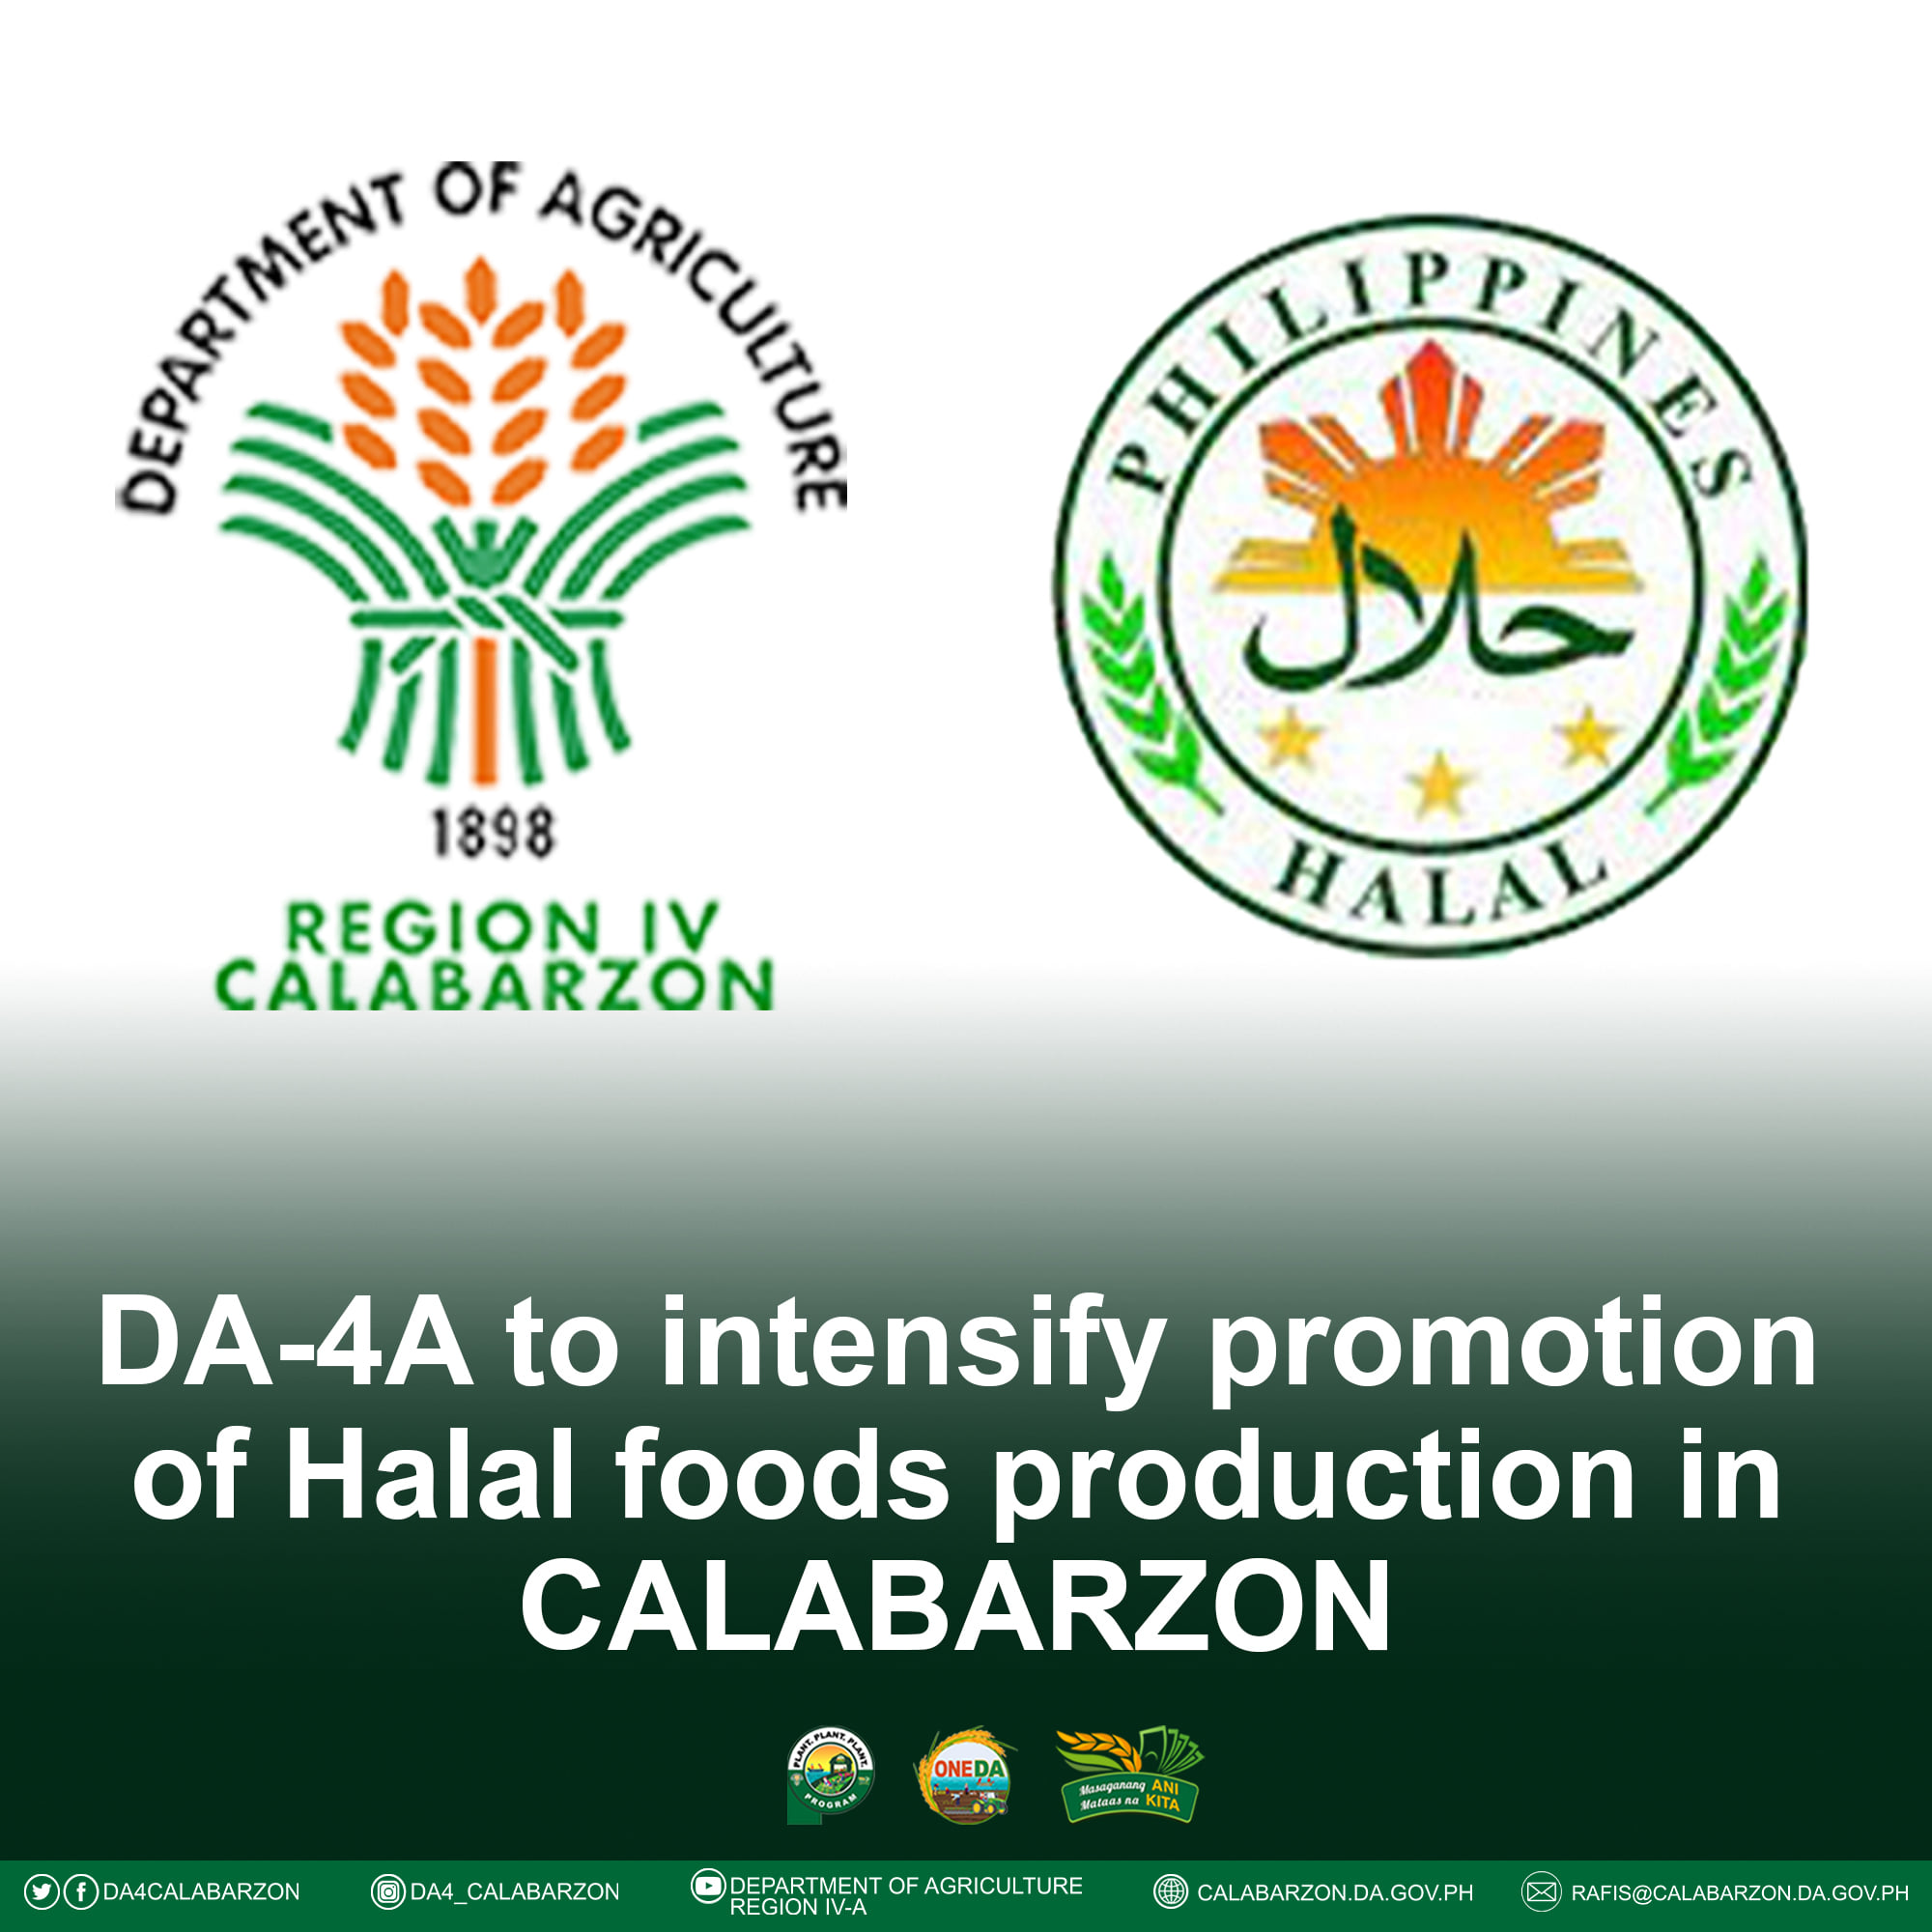 DA-4A to intensify promotion of Halal foods production in CALABARZON